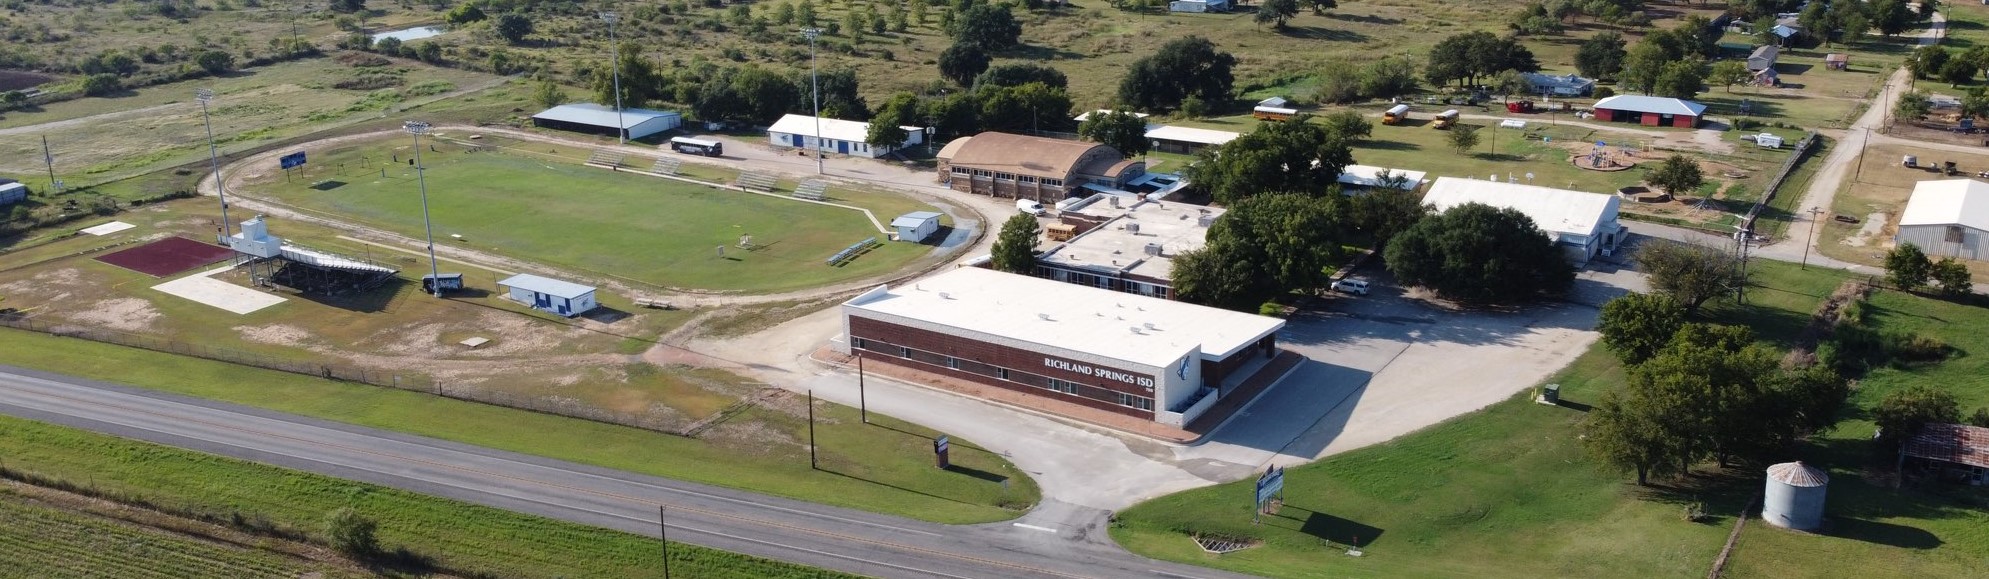 drone shot of richland springs isd campus